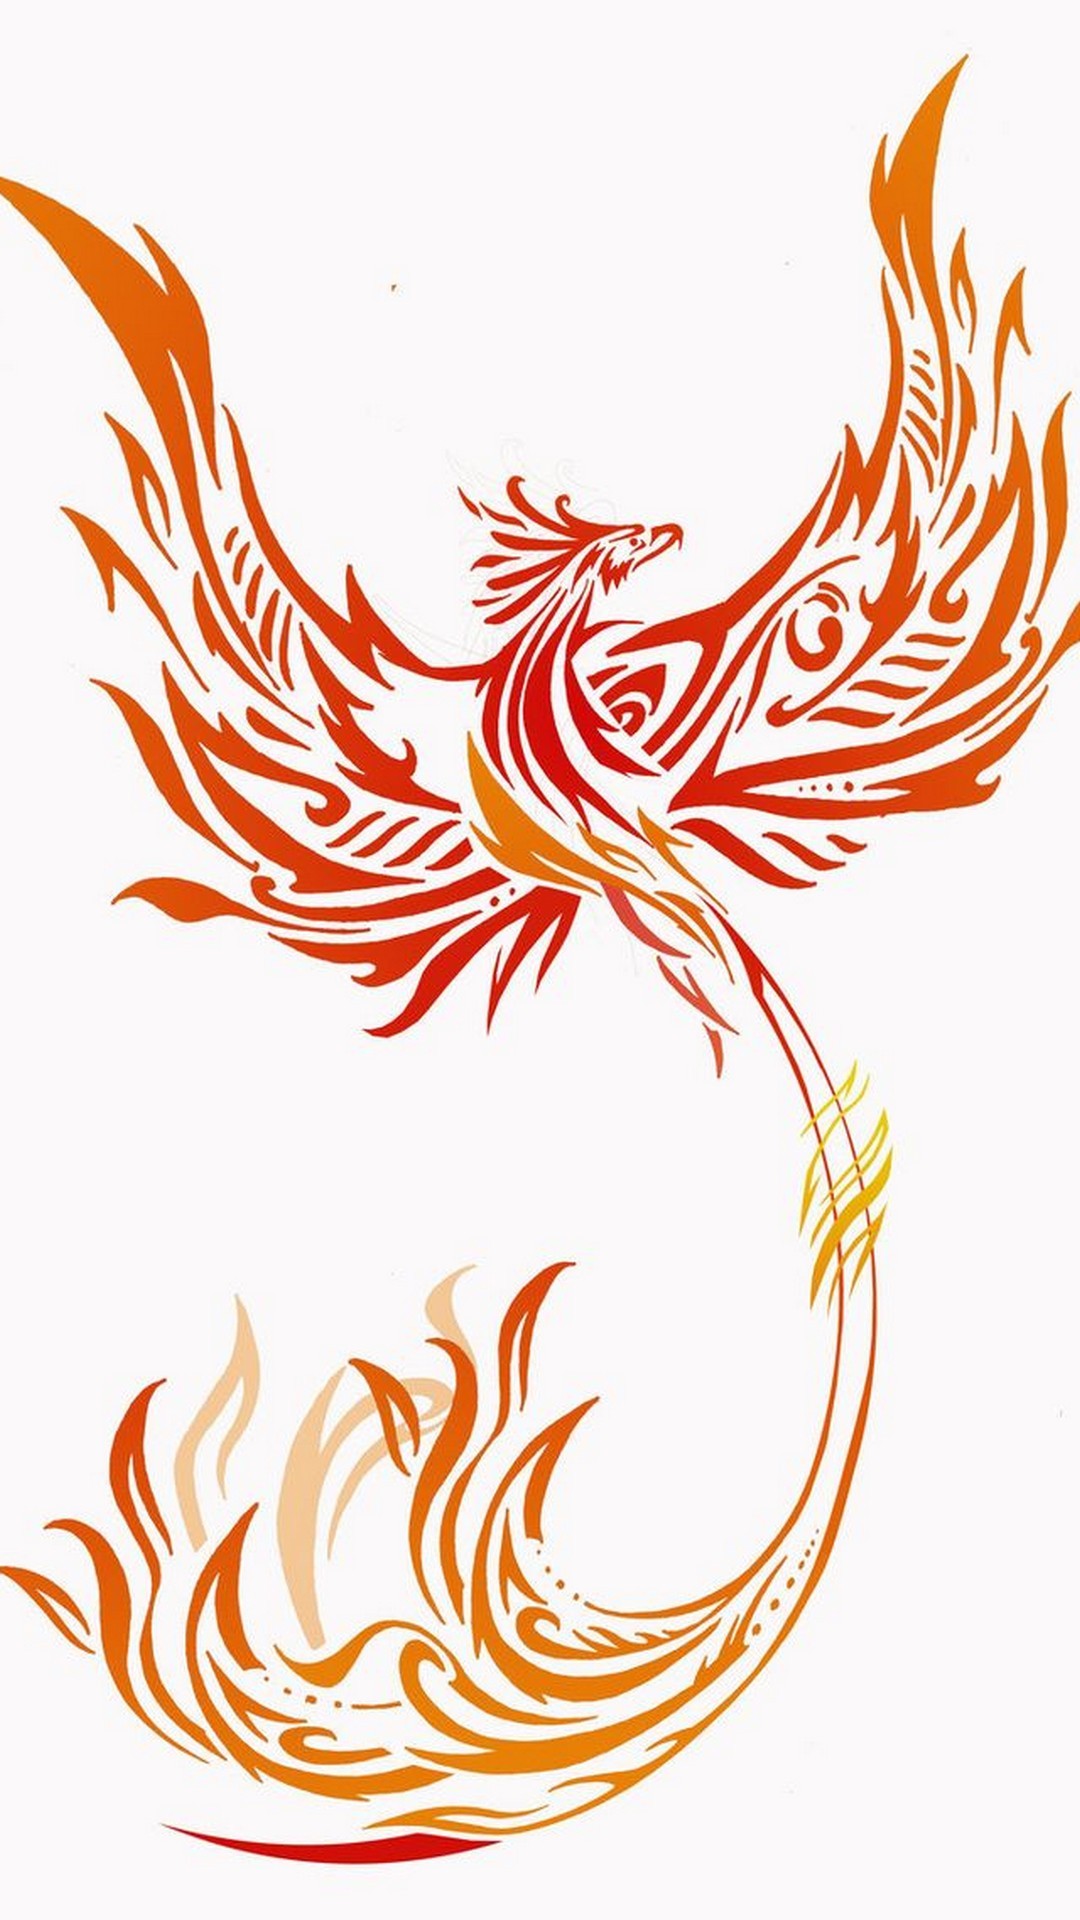 Phoenix Bird Wallpaper For Android with resolution 1080X1920 pixel. You can make this wallpaper for your Android backgrounds, Tablet, Smartphones Screensavers and Mobile Phone Lock Screen